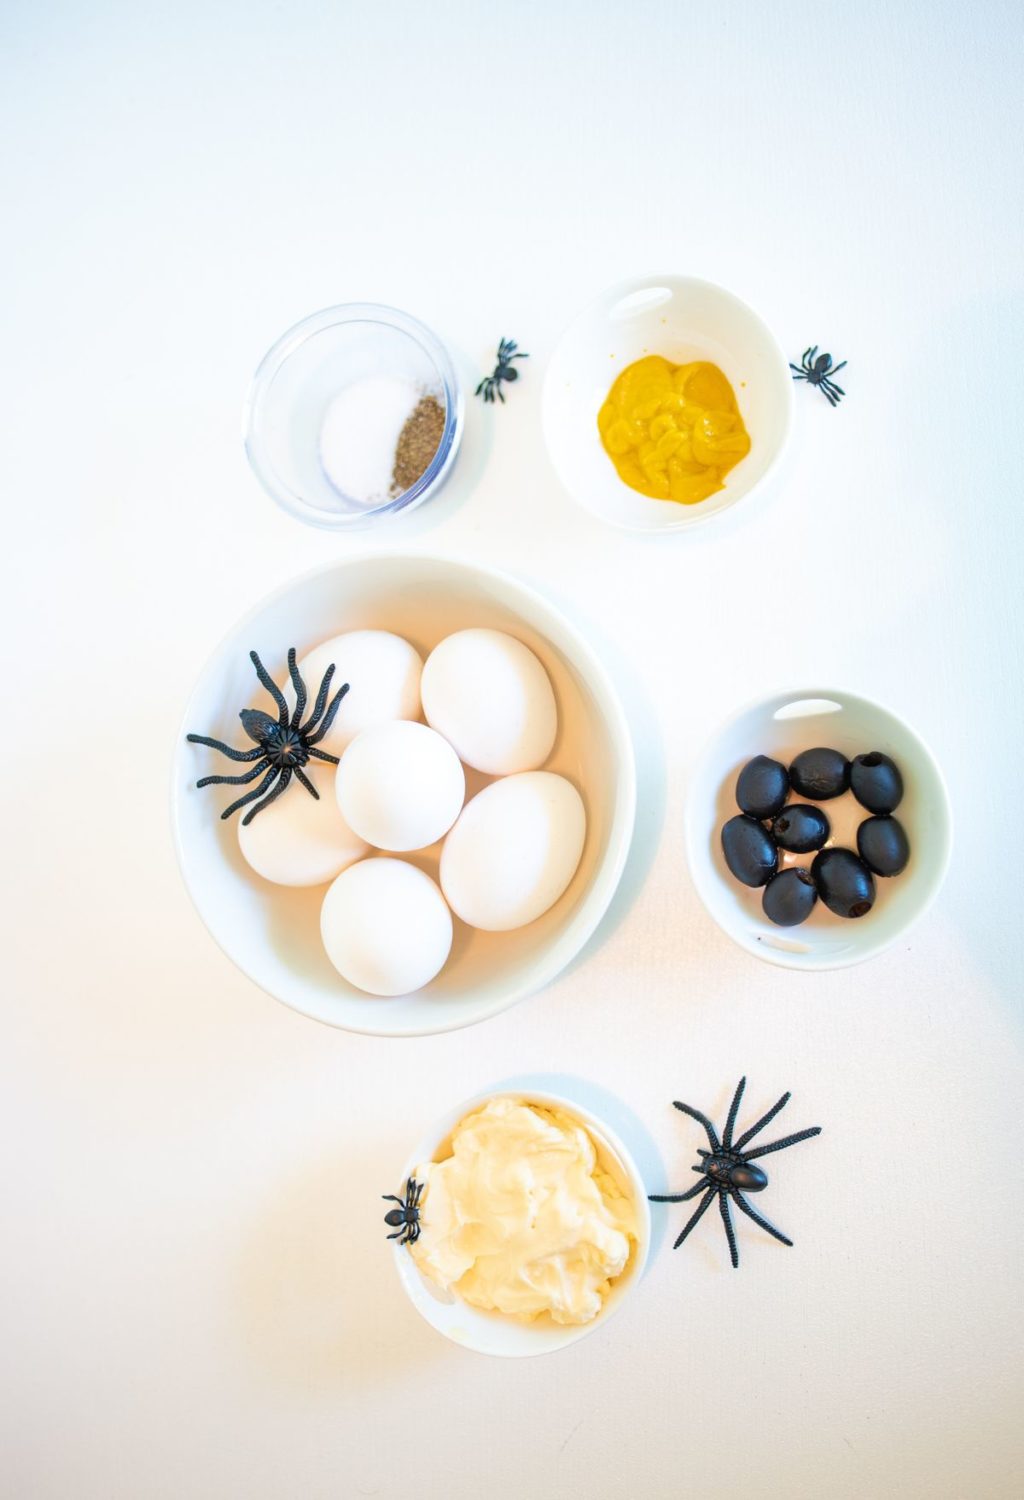 Eggs, spiders, and other ingredients are laid out on a table.